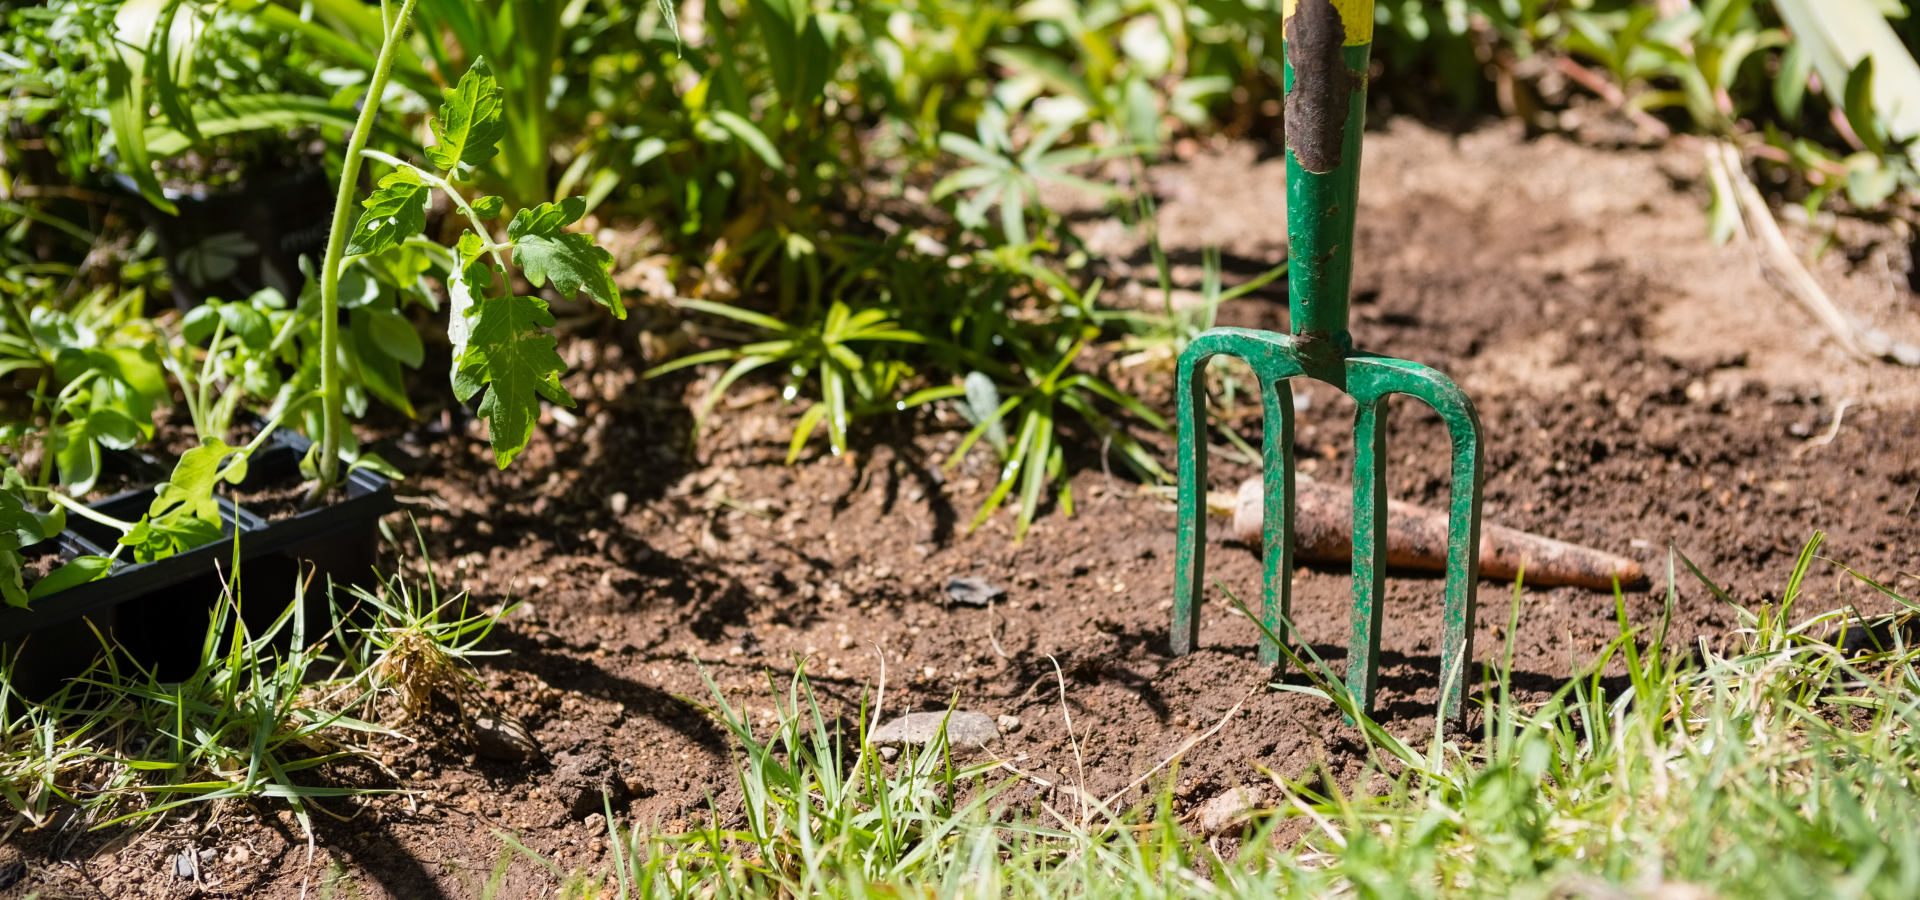 A garden fork being plunged into a vegetable patch